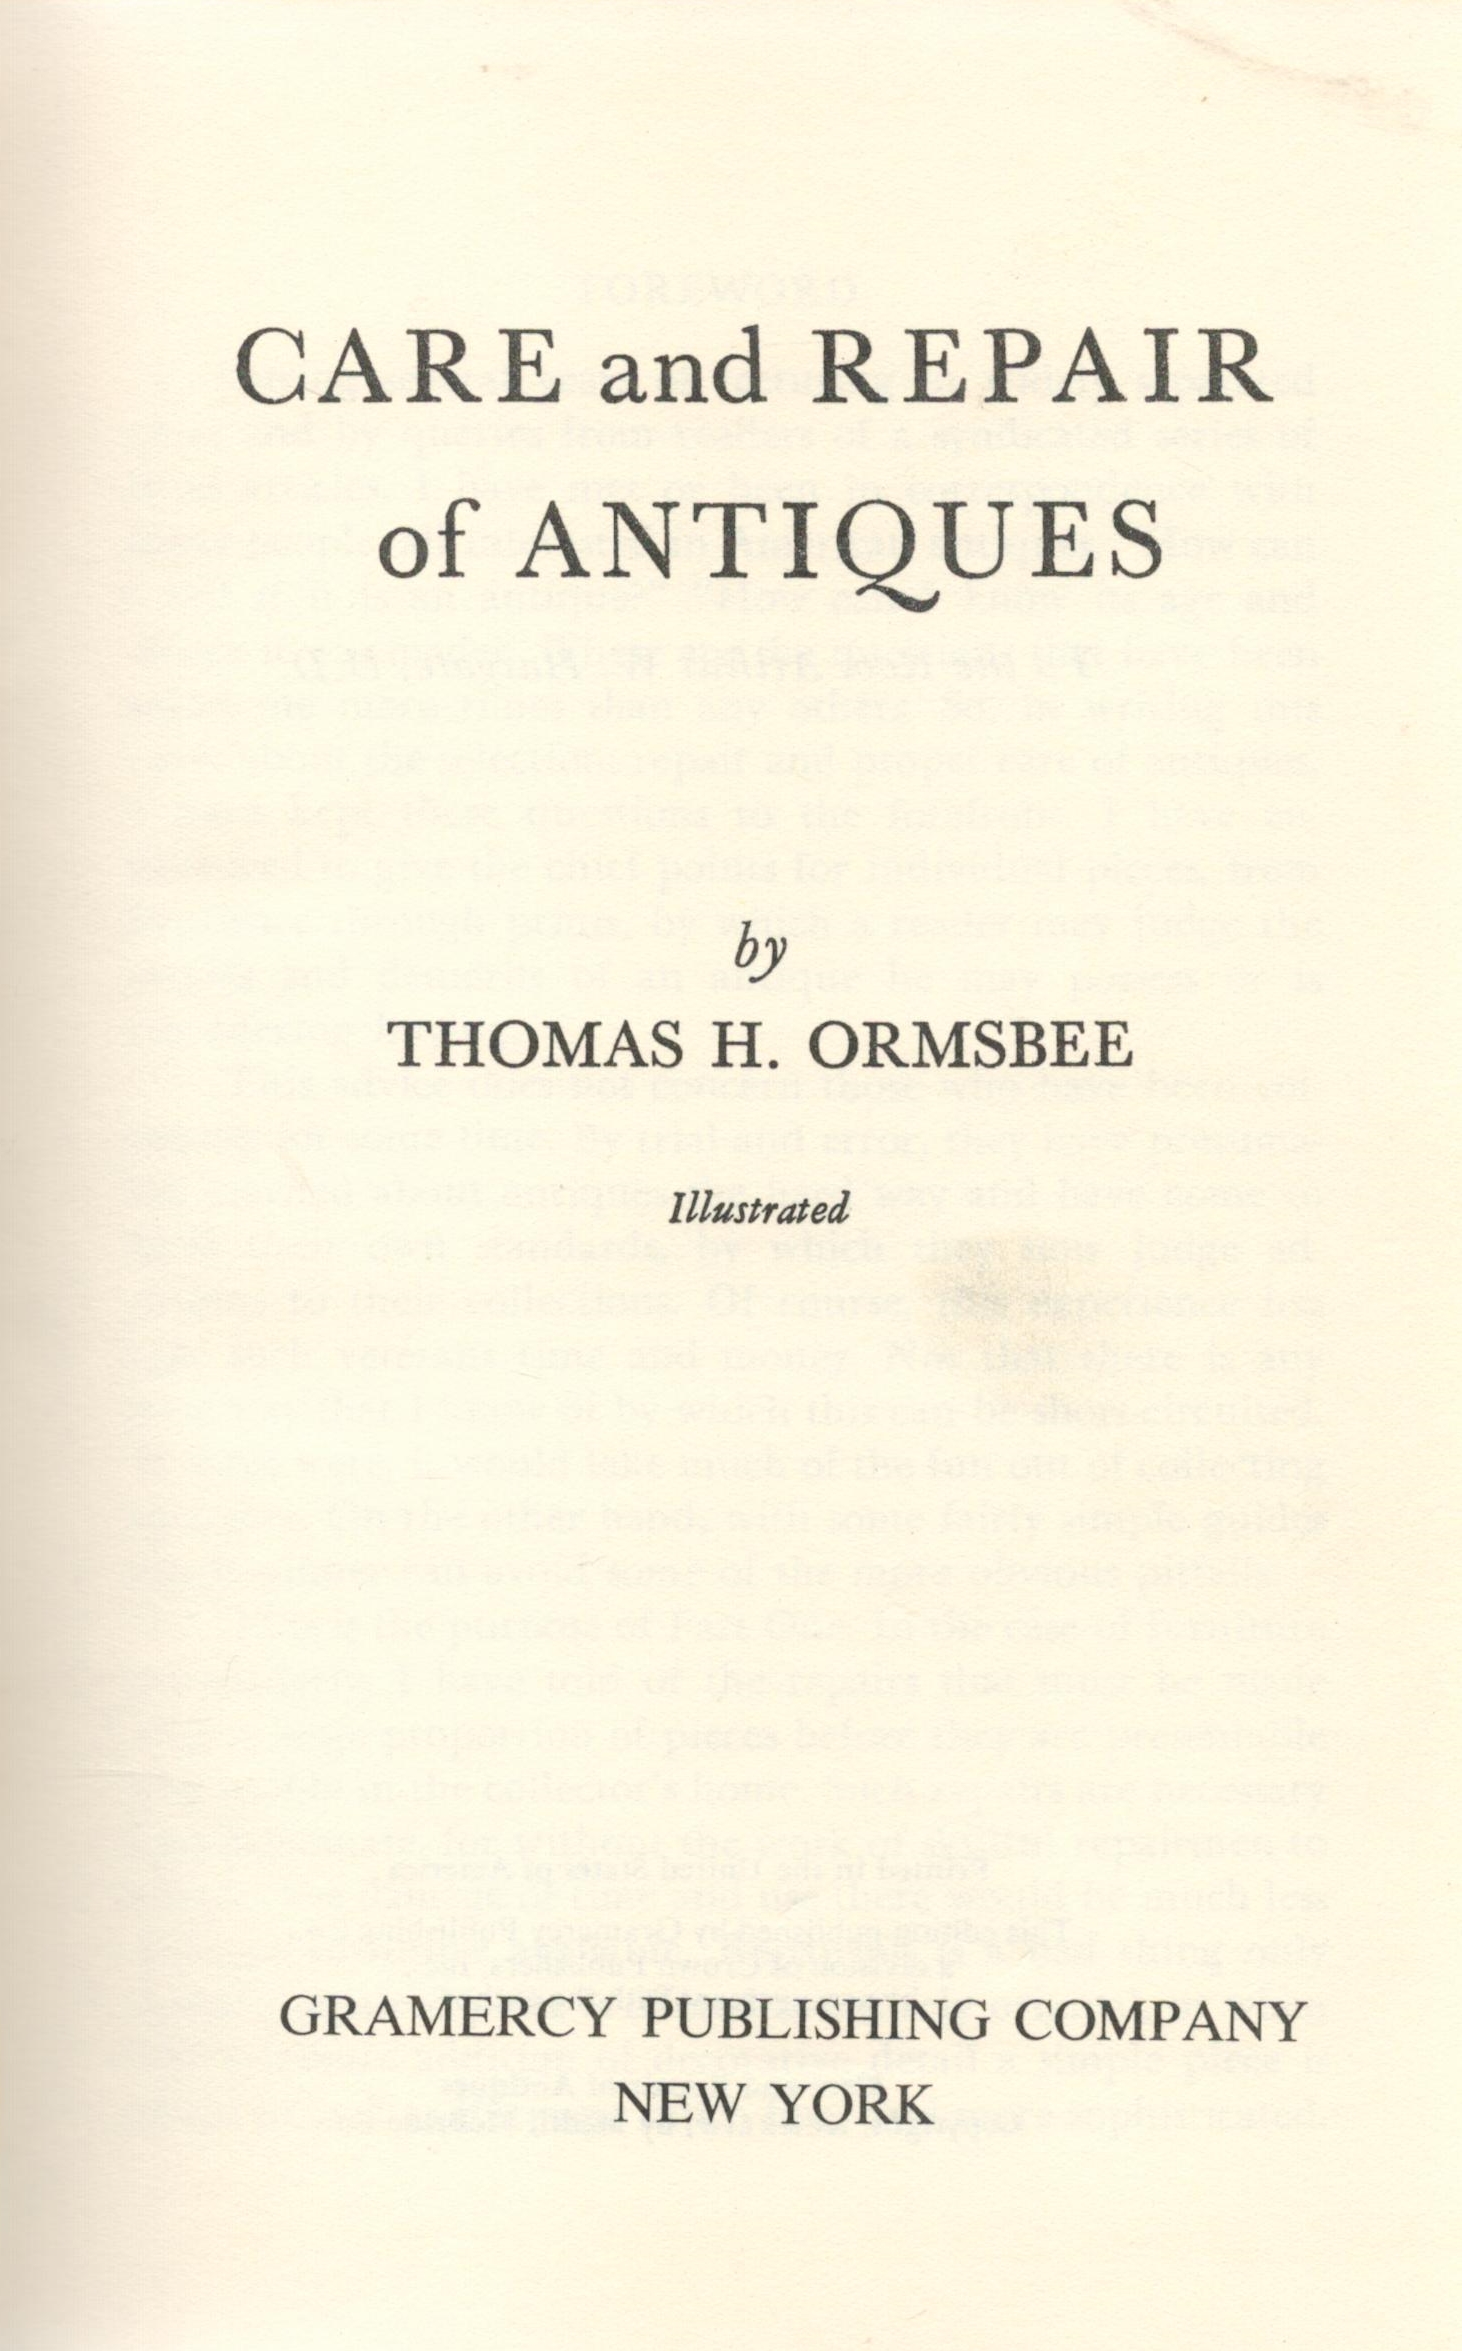 Care and Repair of Antiques by Thomas H Ormsbee Hardback Book date and edition unknown published - Image 2 of 3